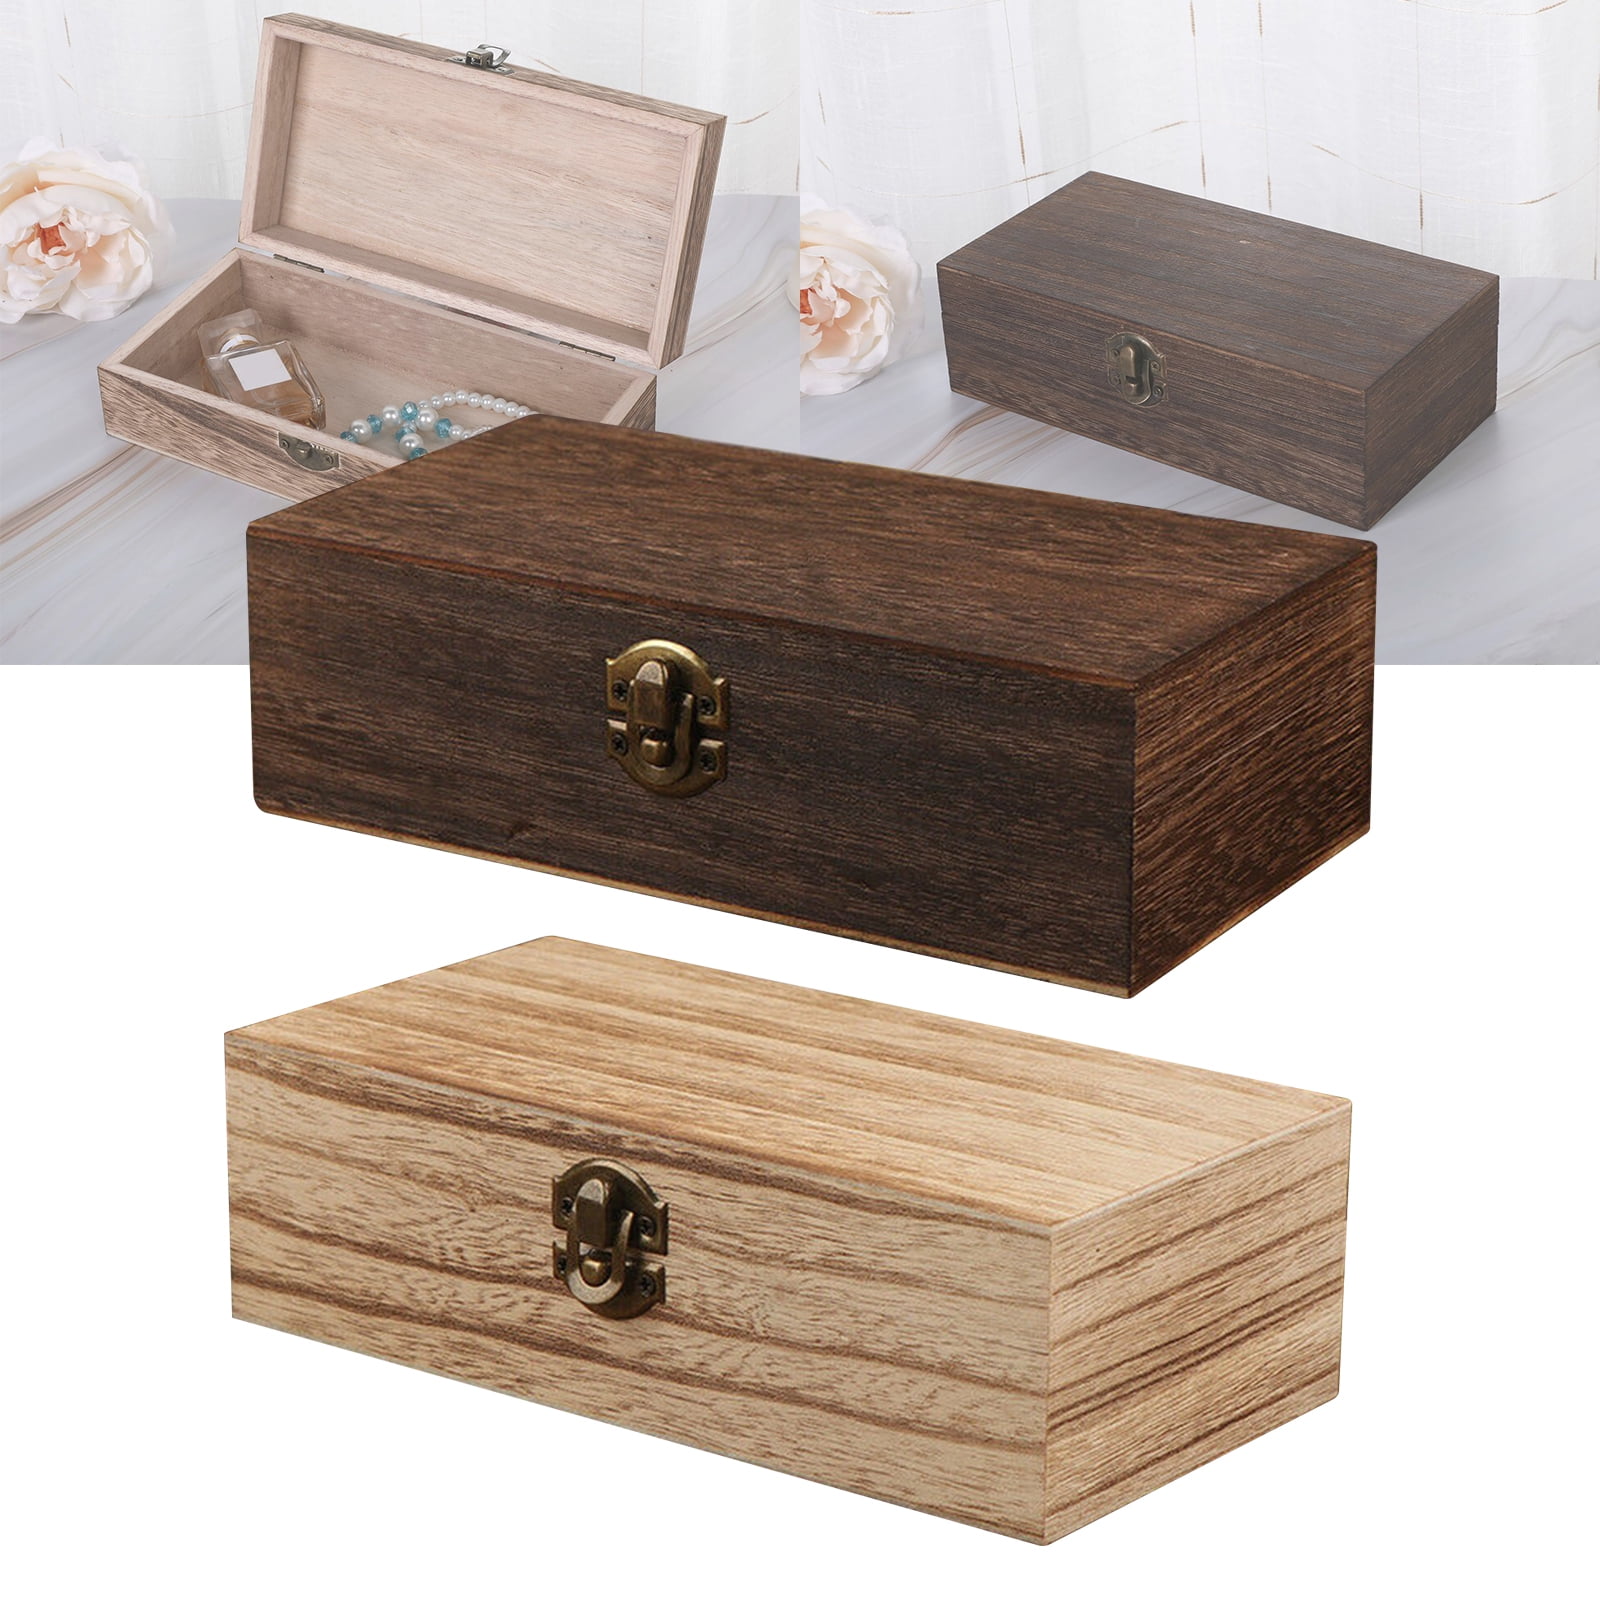 Rectangular Wooden Box With Lid Clasp & 4 Sections Compartments Trinket Memory 